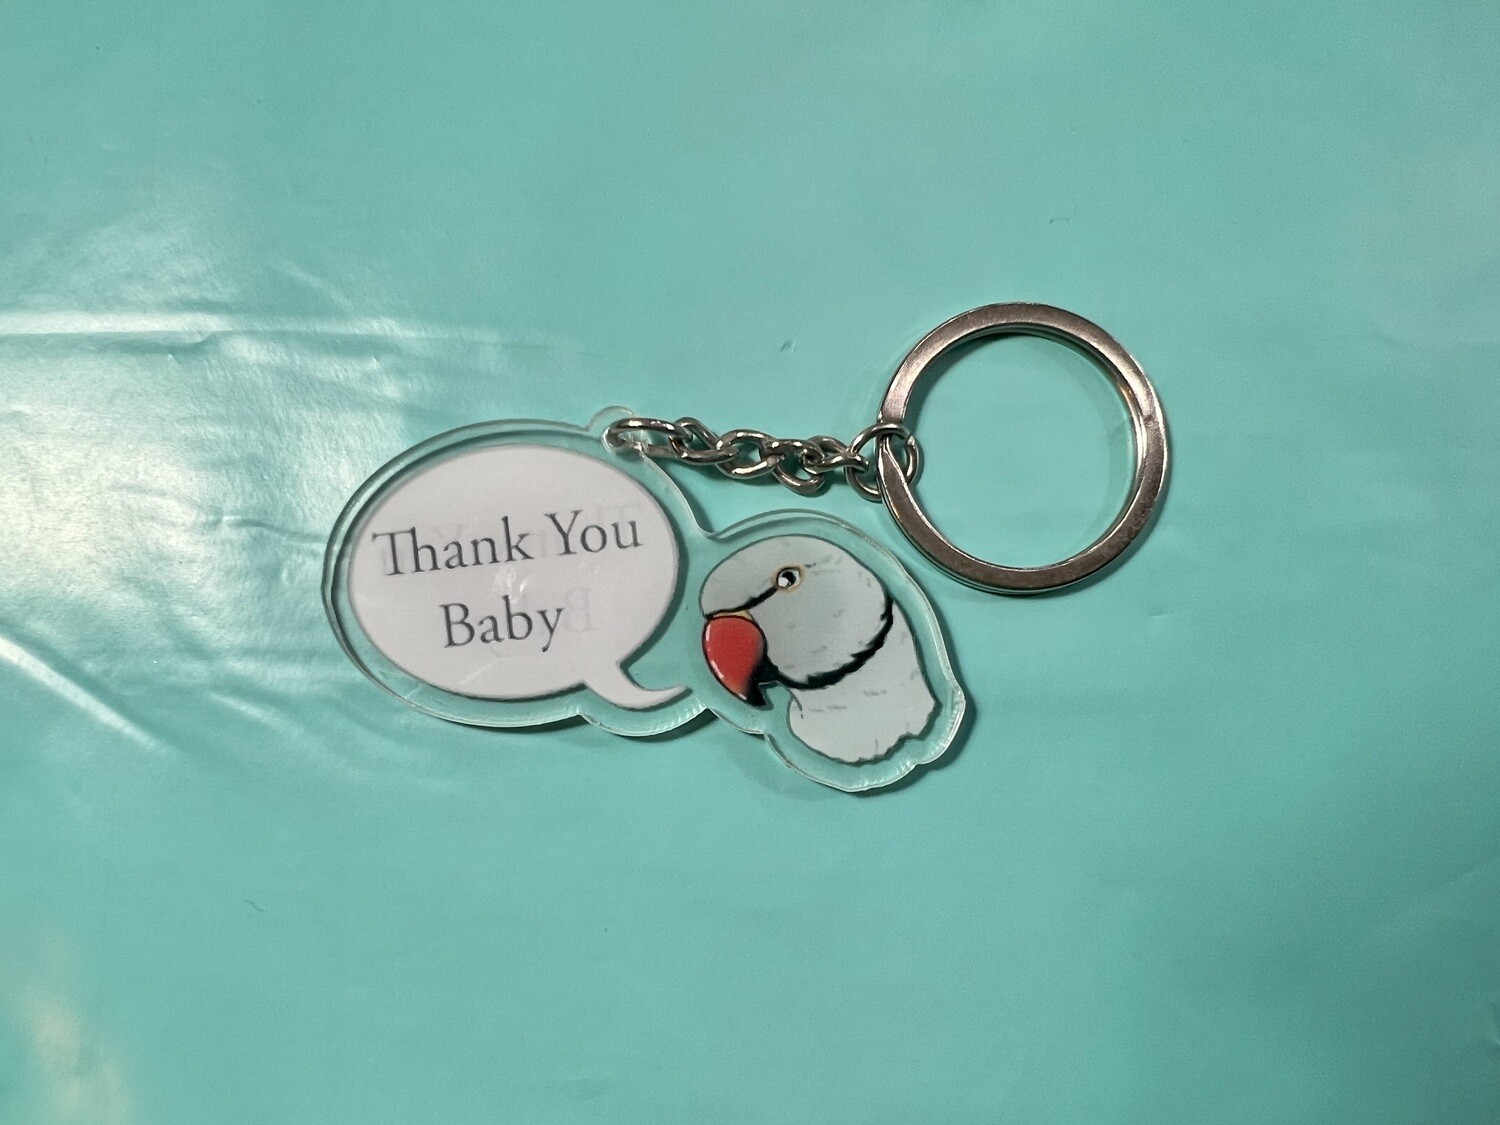 Bubble Head Keychain "Thank You Baby"